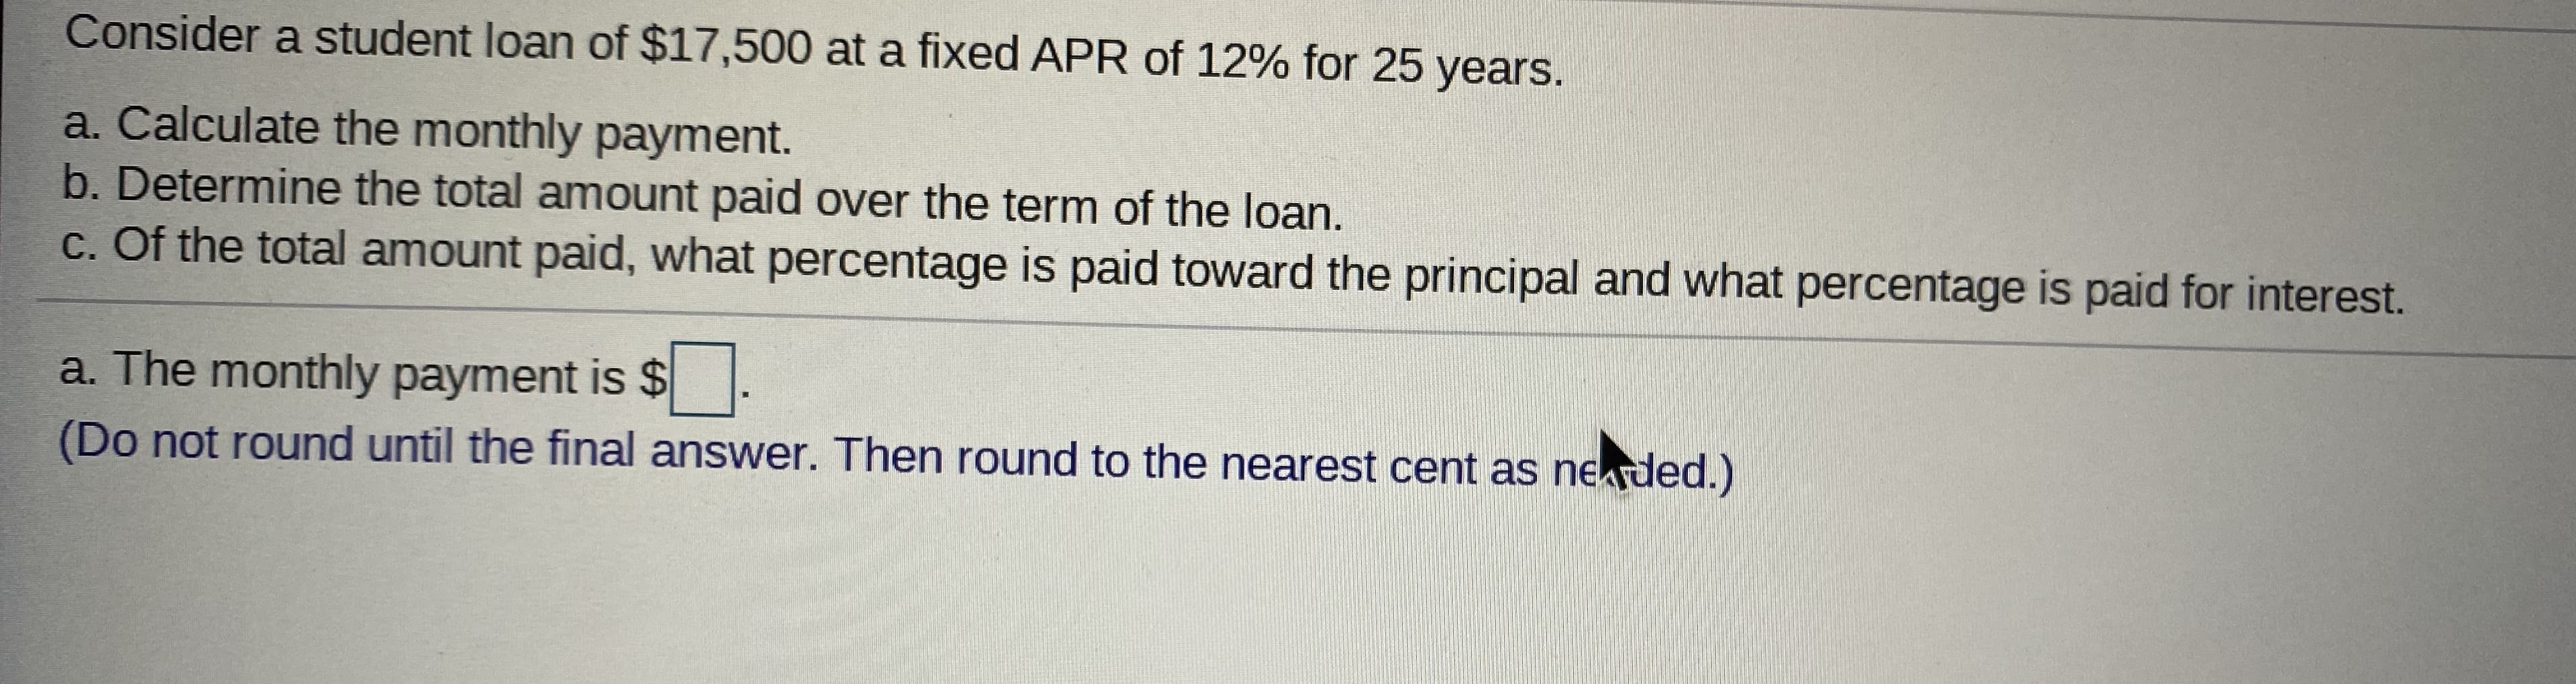 Consider a student loan of $17,500 at a fixed APR of 12% for 25 years.
a. Calculate the monthly payment.
b. Determine the total amount paid over the term of the loan.
c. Of the total amount paid, what percentage is paid toward the principal and what percentage is paid for interest.
a. The monthly payment is $.
(Do not round until the final answer. Then round to the nearest cent as neded.)
